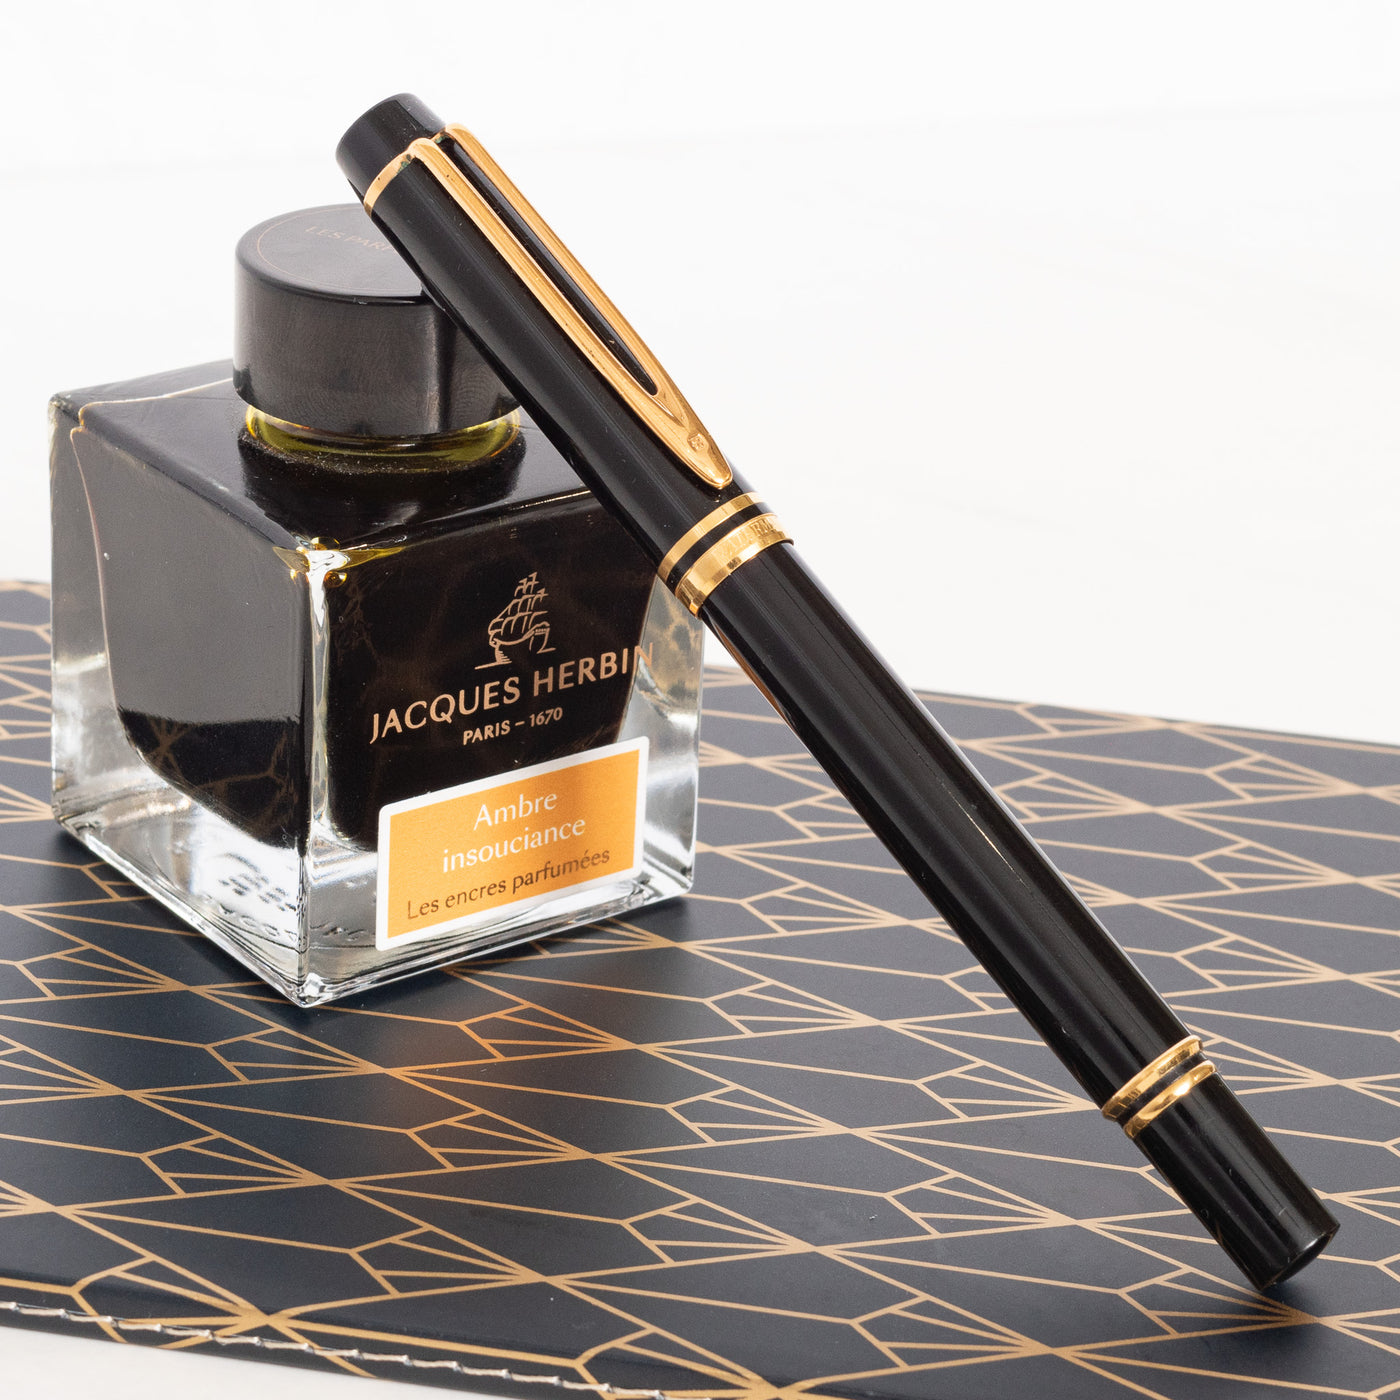 Waterman Le Man 200 Black & Gold Rollerball Pen capped